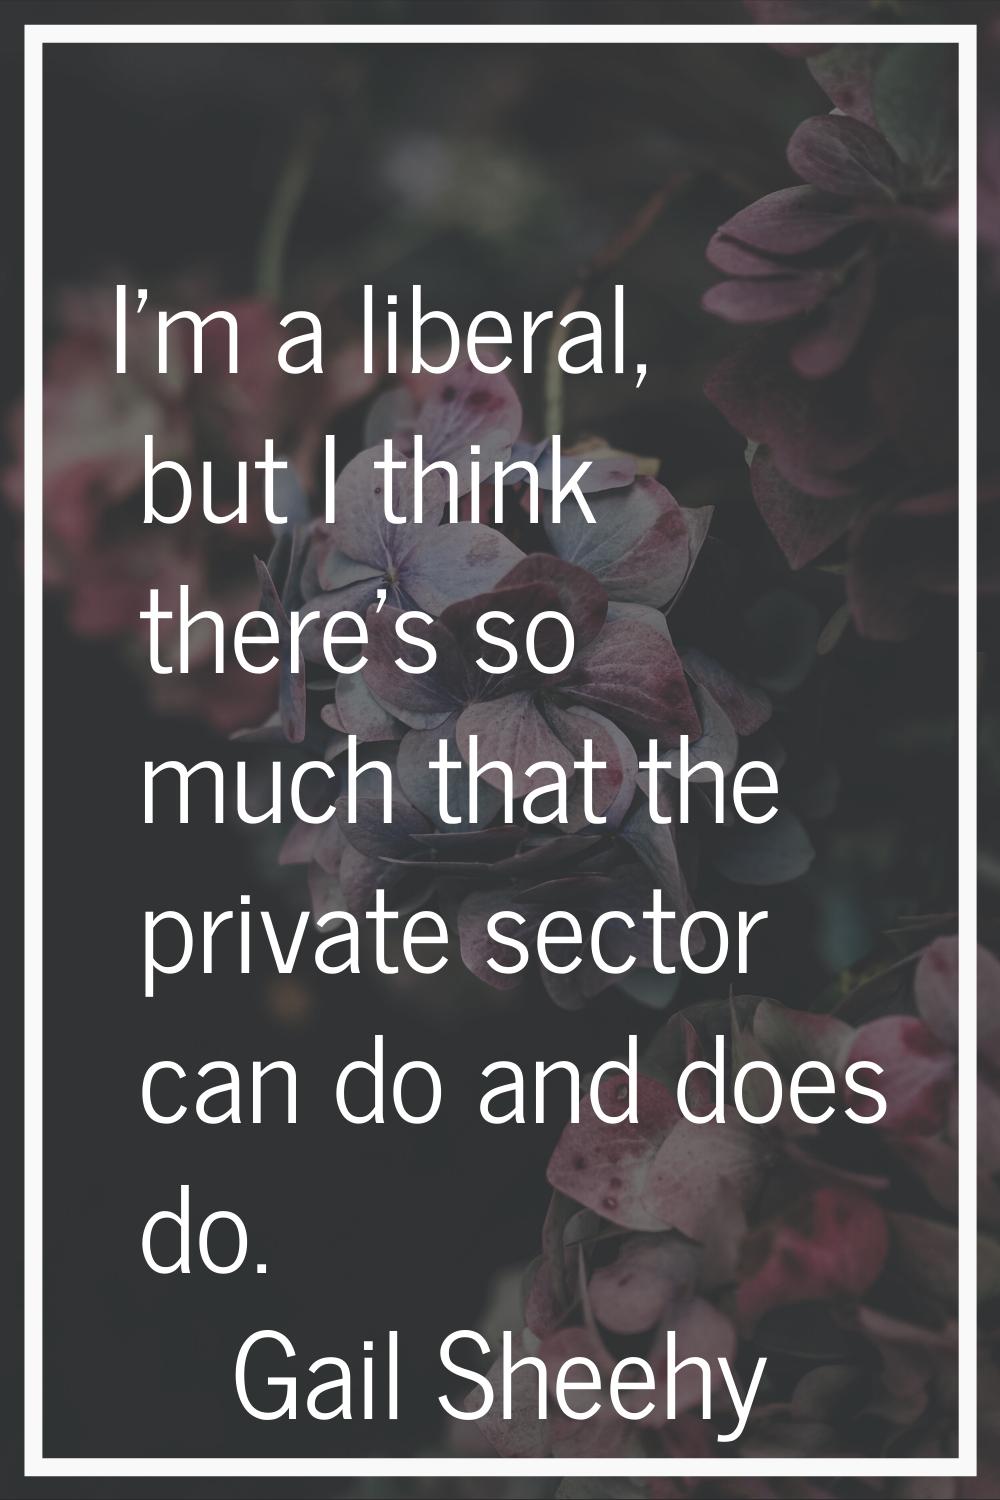 I'm a liberal, but I think there's so much that the private sector can do and does do.